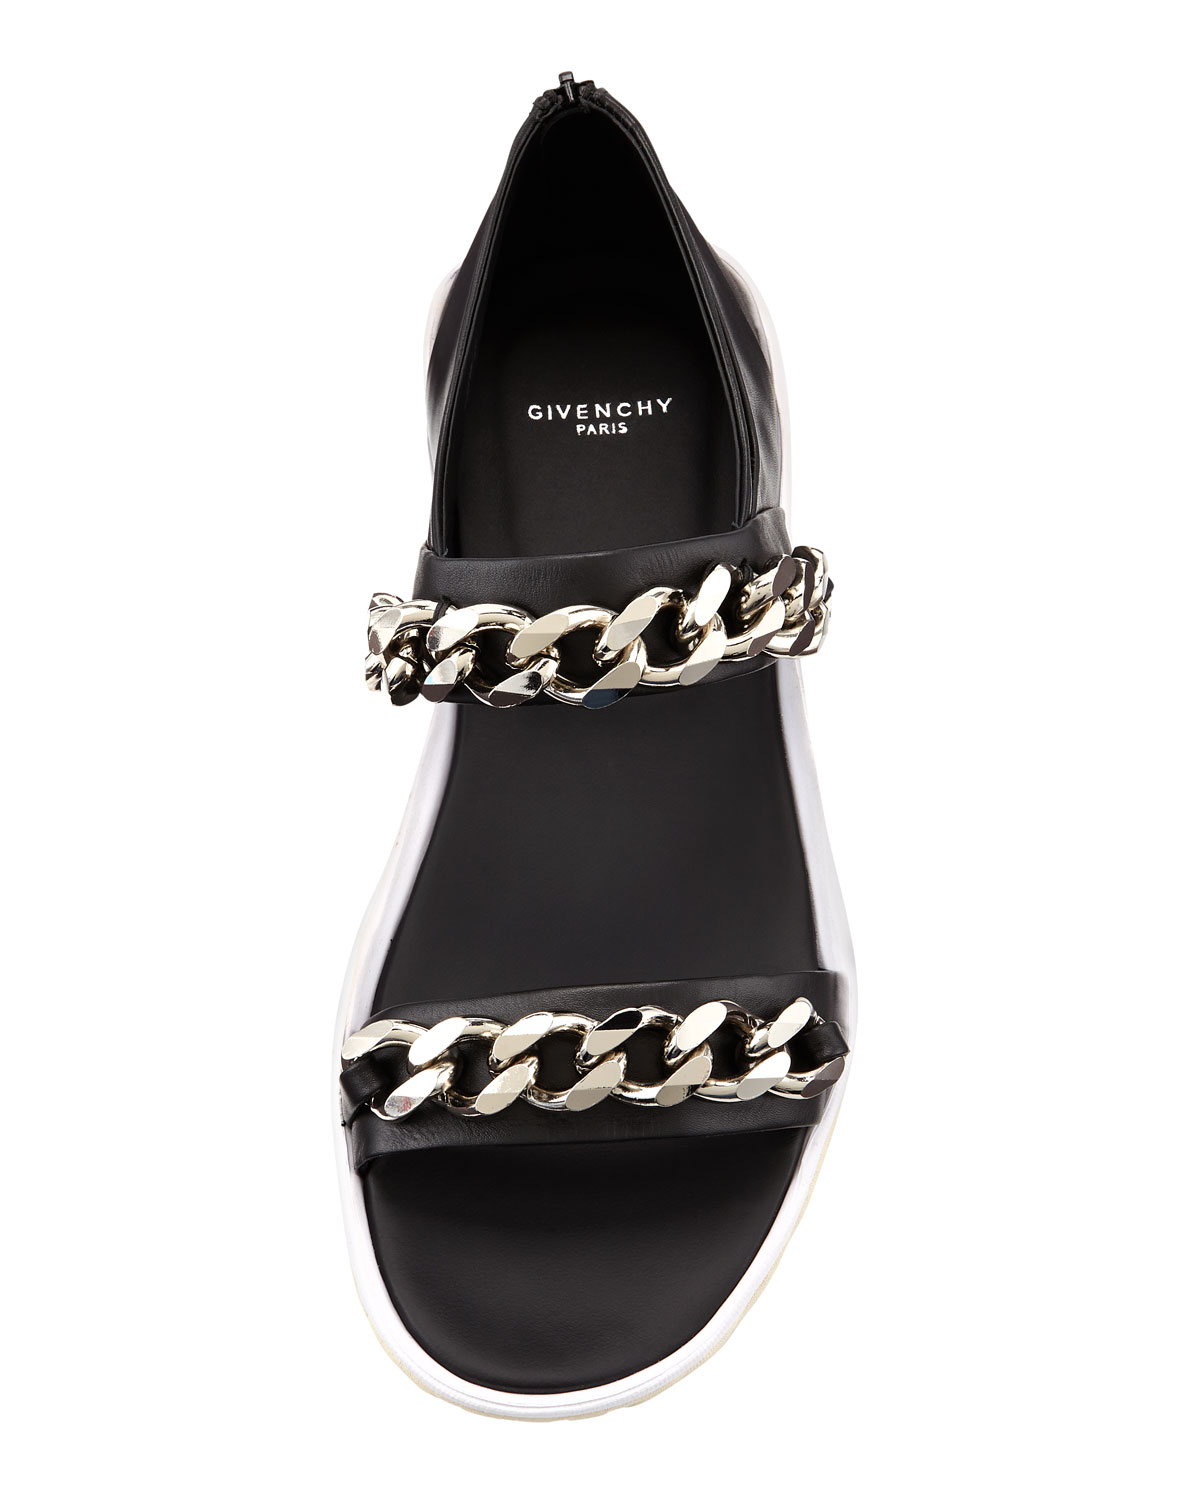 Lyst - Givenchy Palladio Mens Leather Chain-strap Sandal in Black for Men